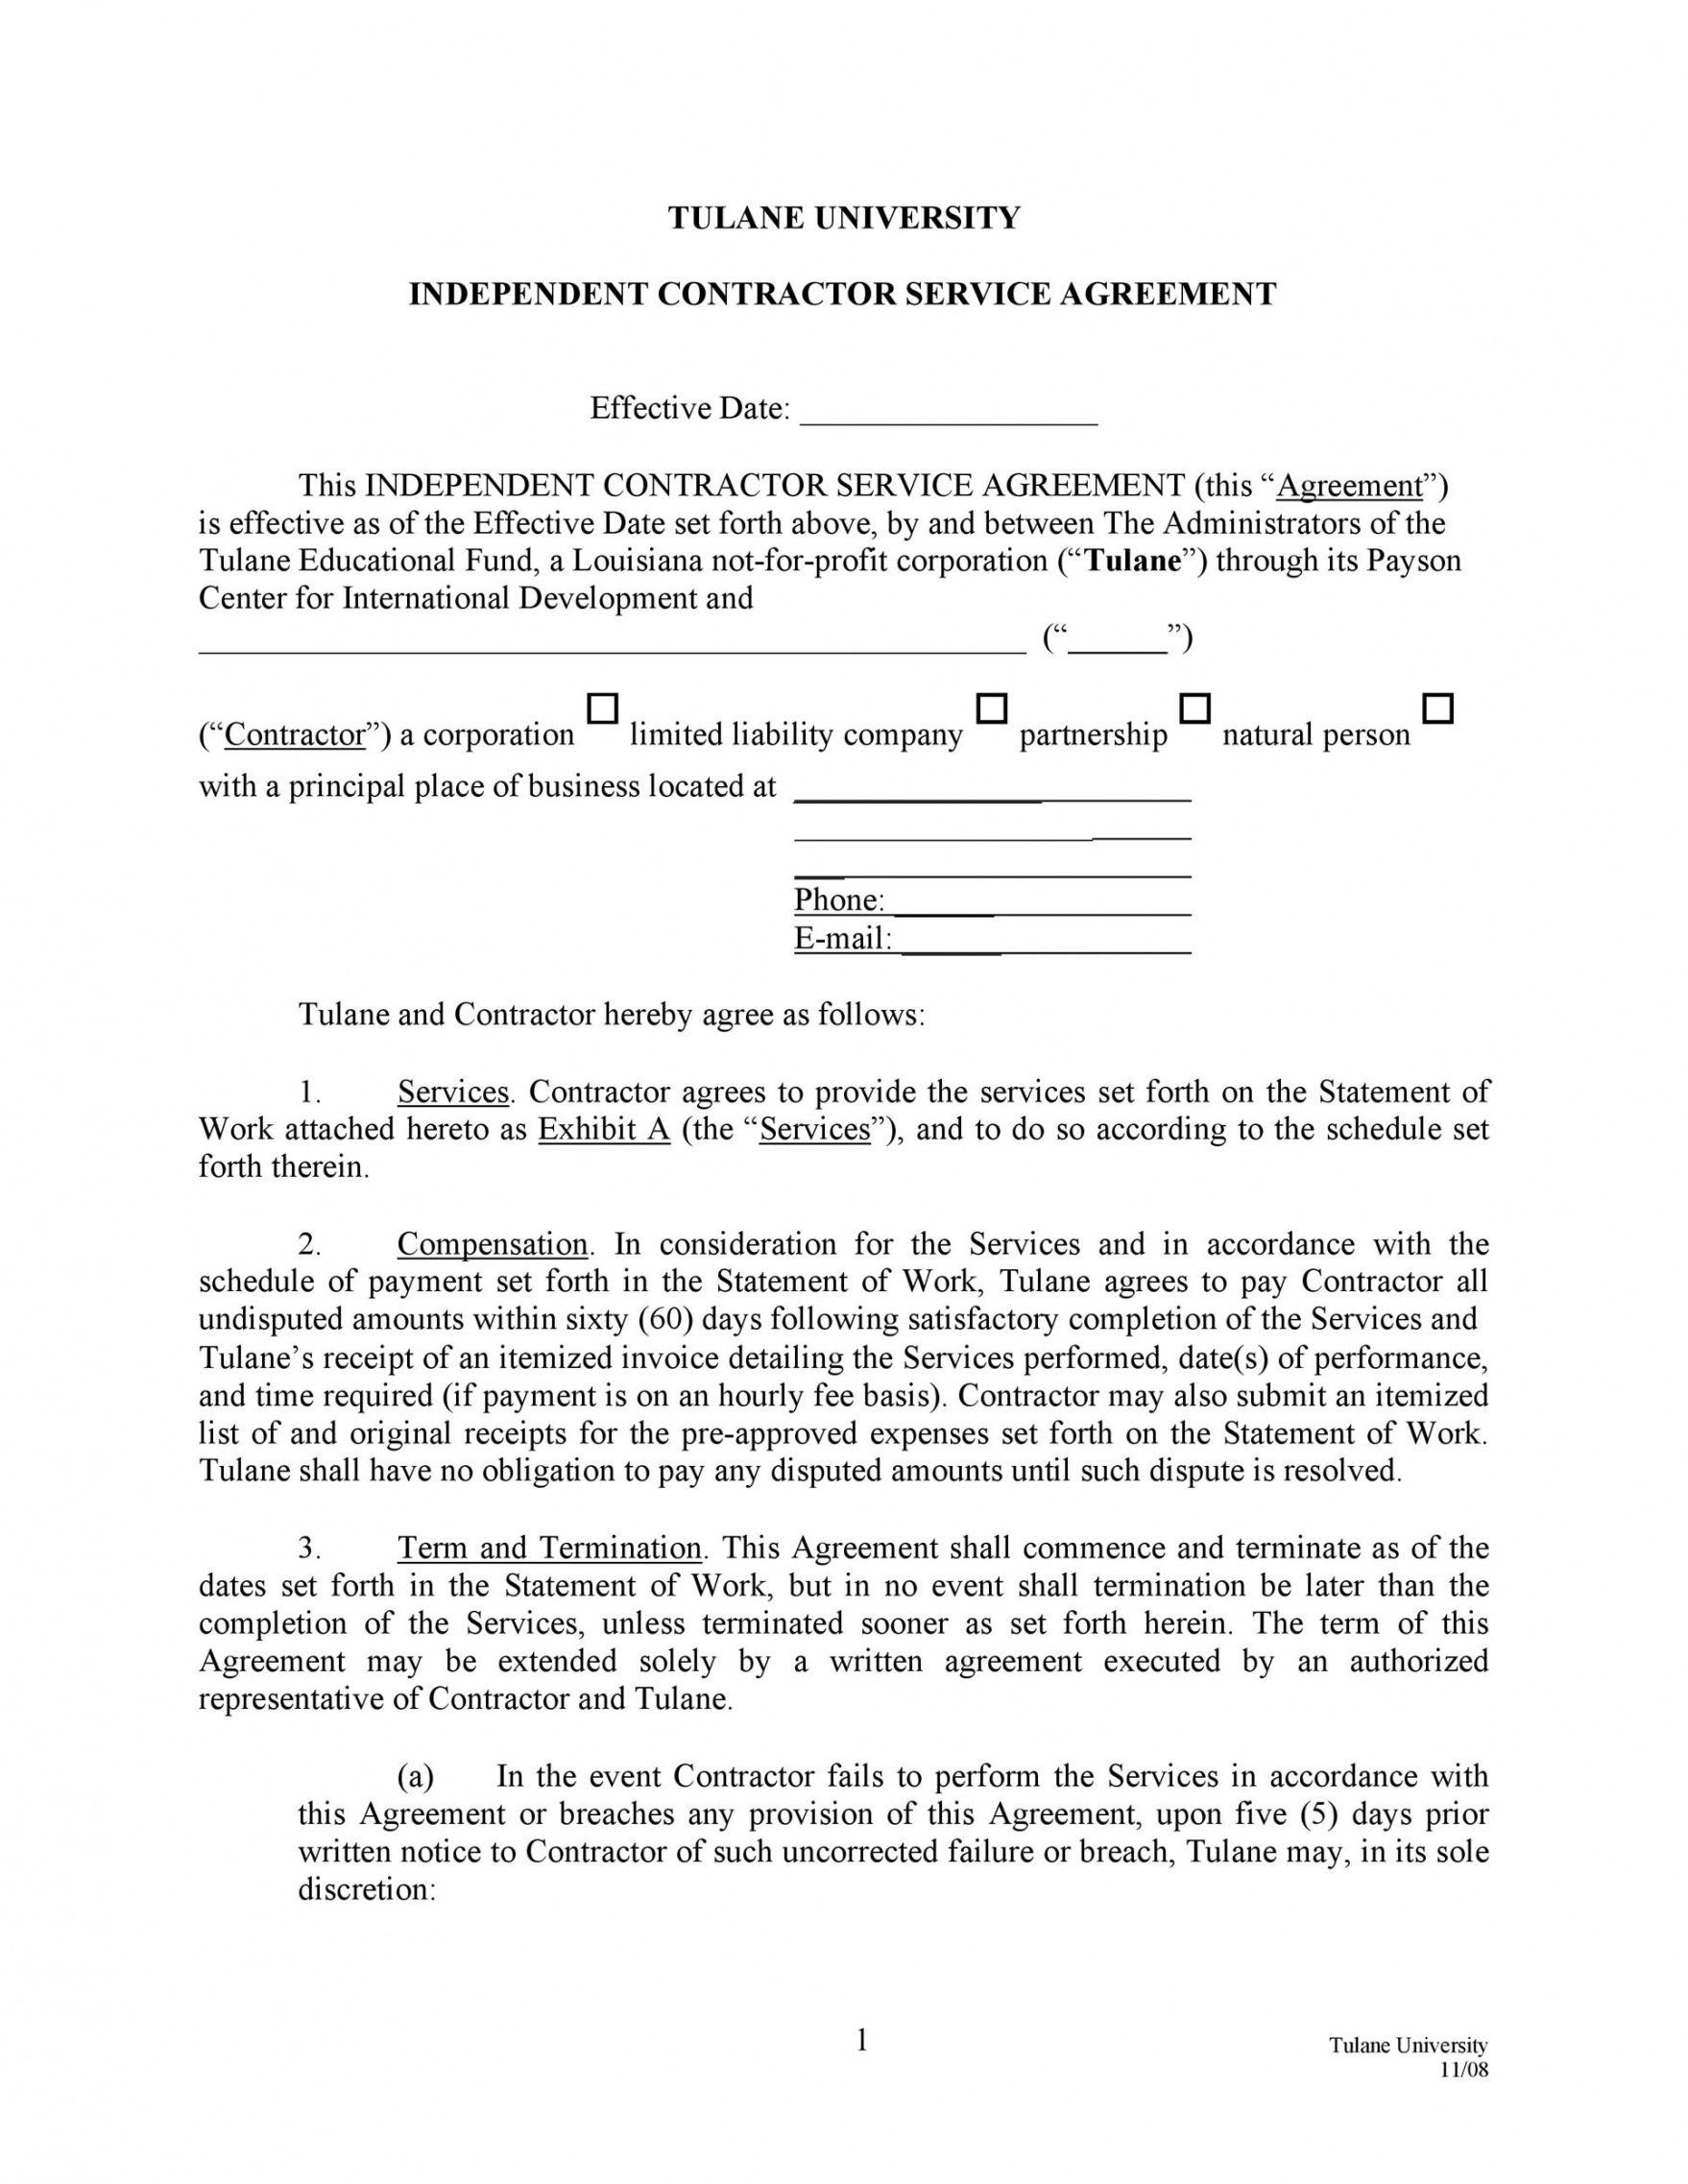 50 professional service agreement templates &amp; contracts service provision agreement template